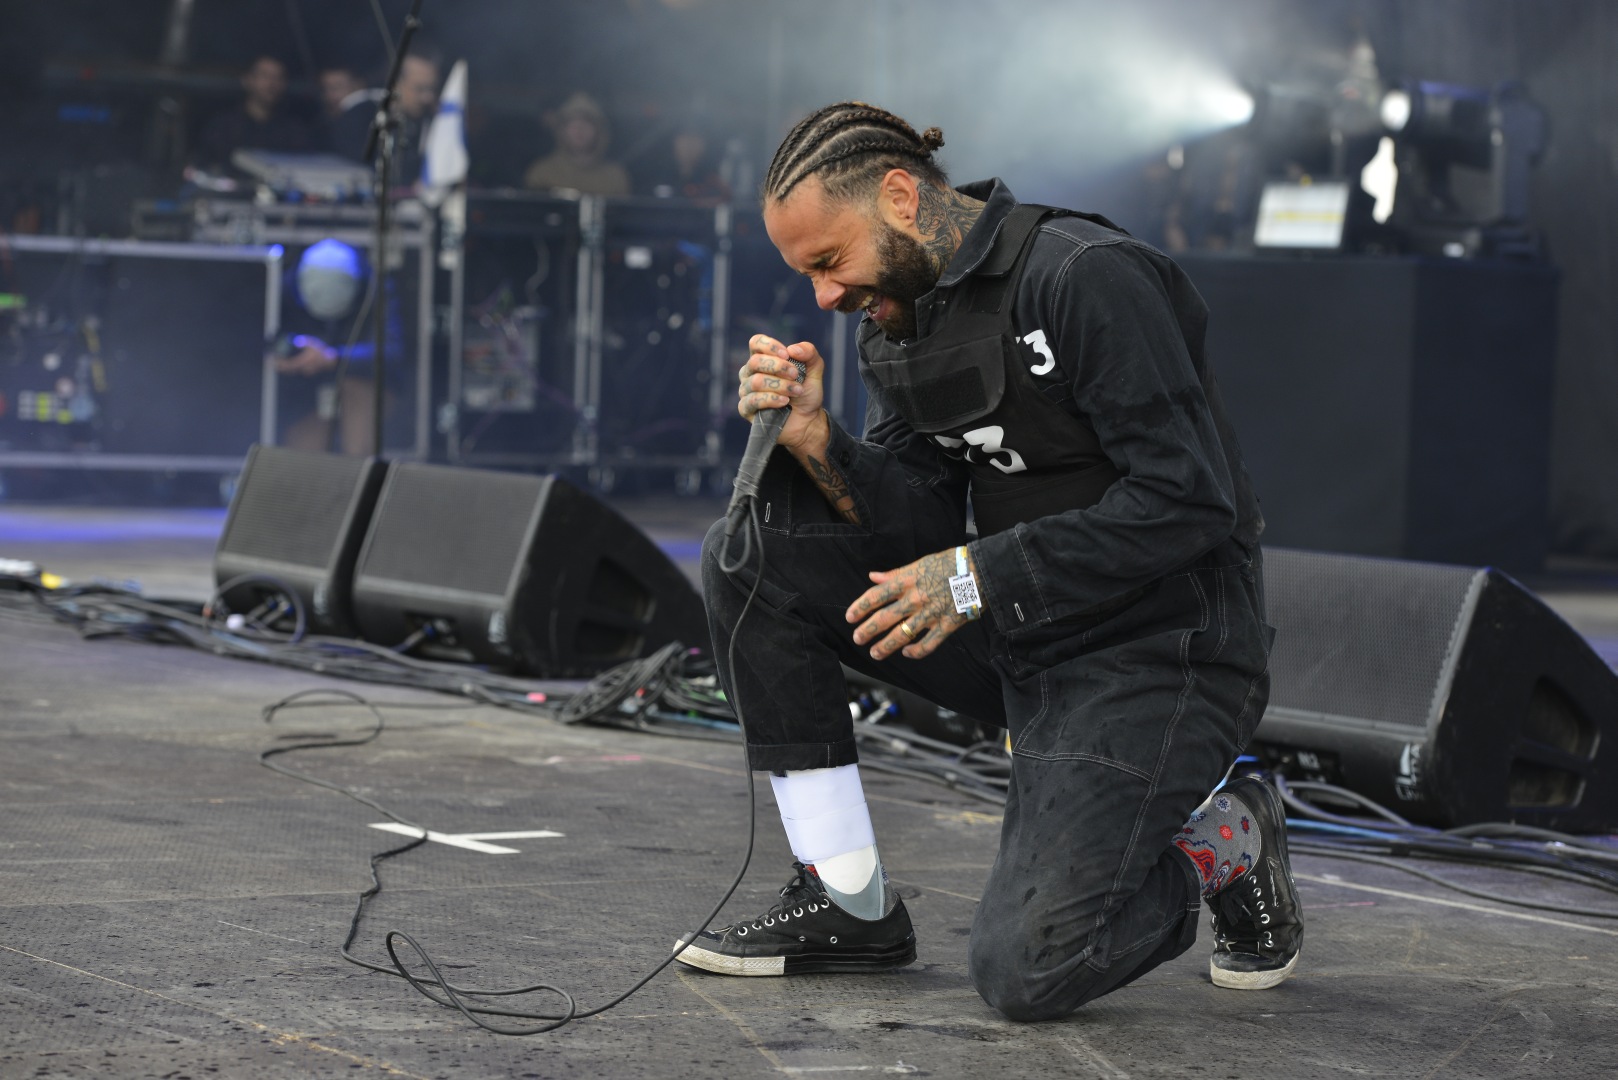 The Fever 333 bei Rock am Ring 2019